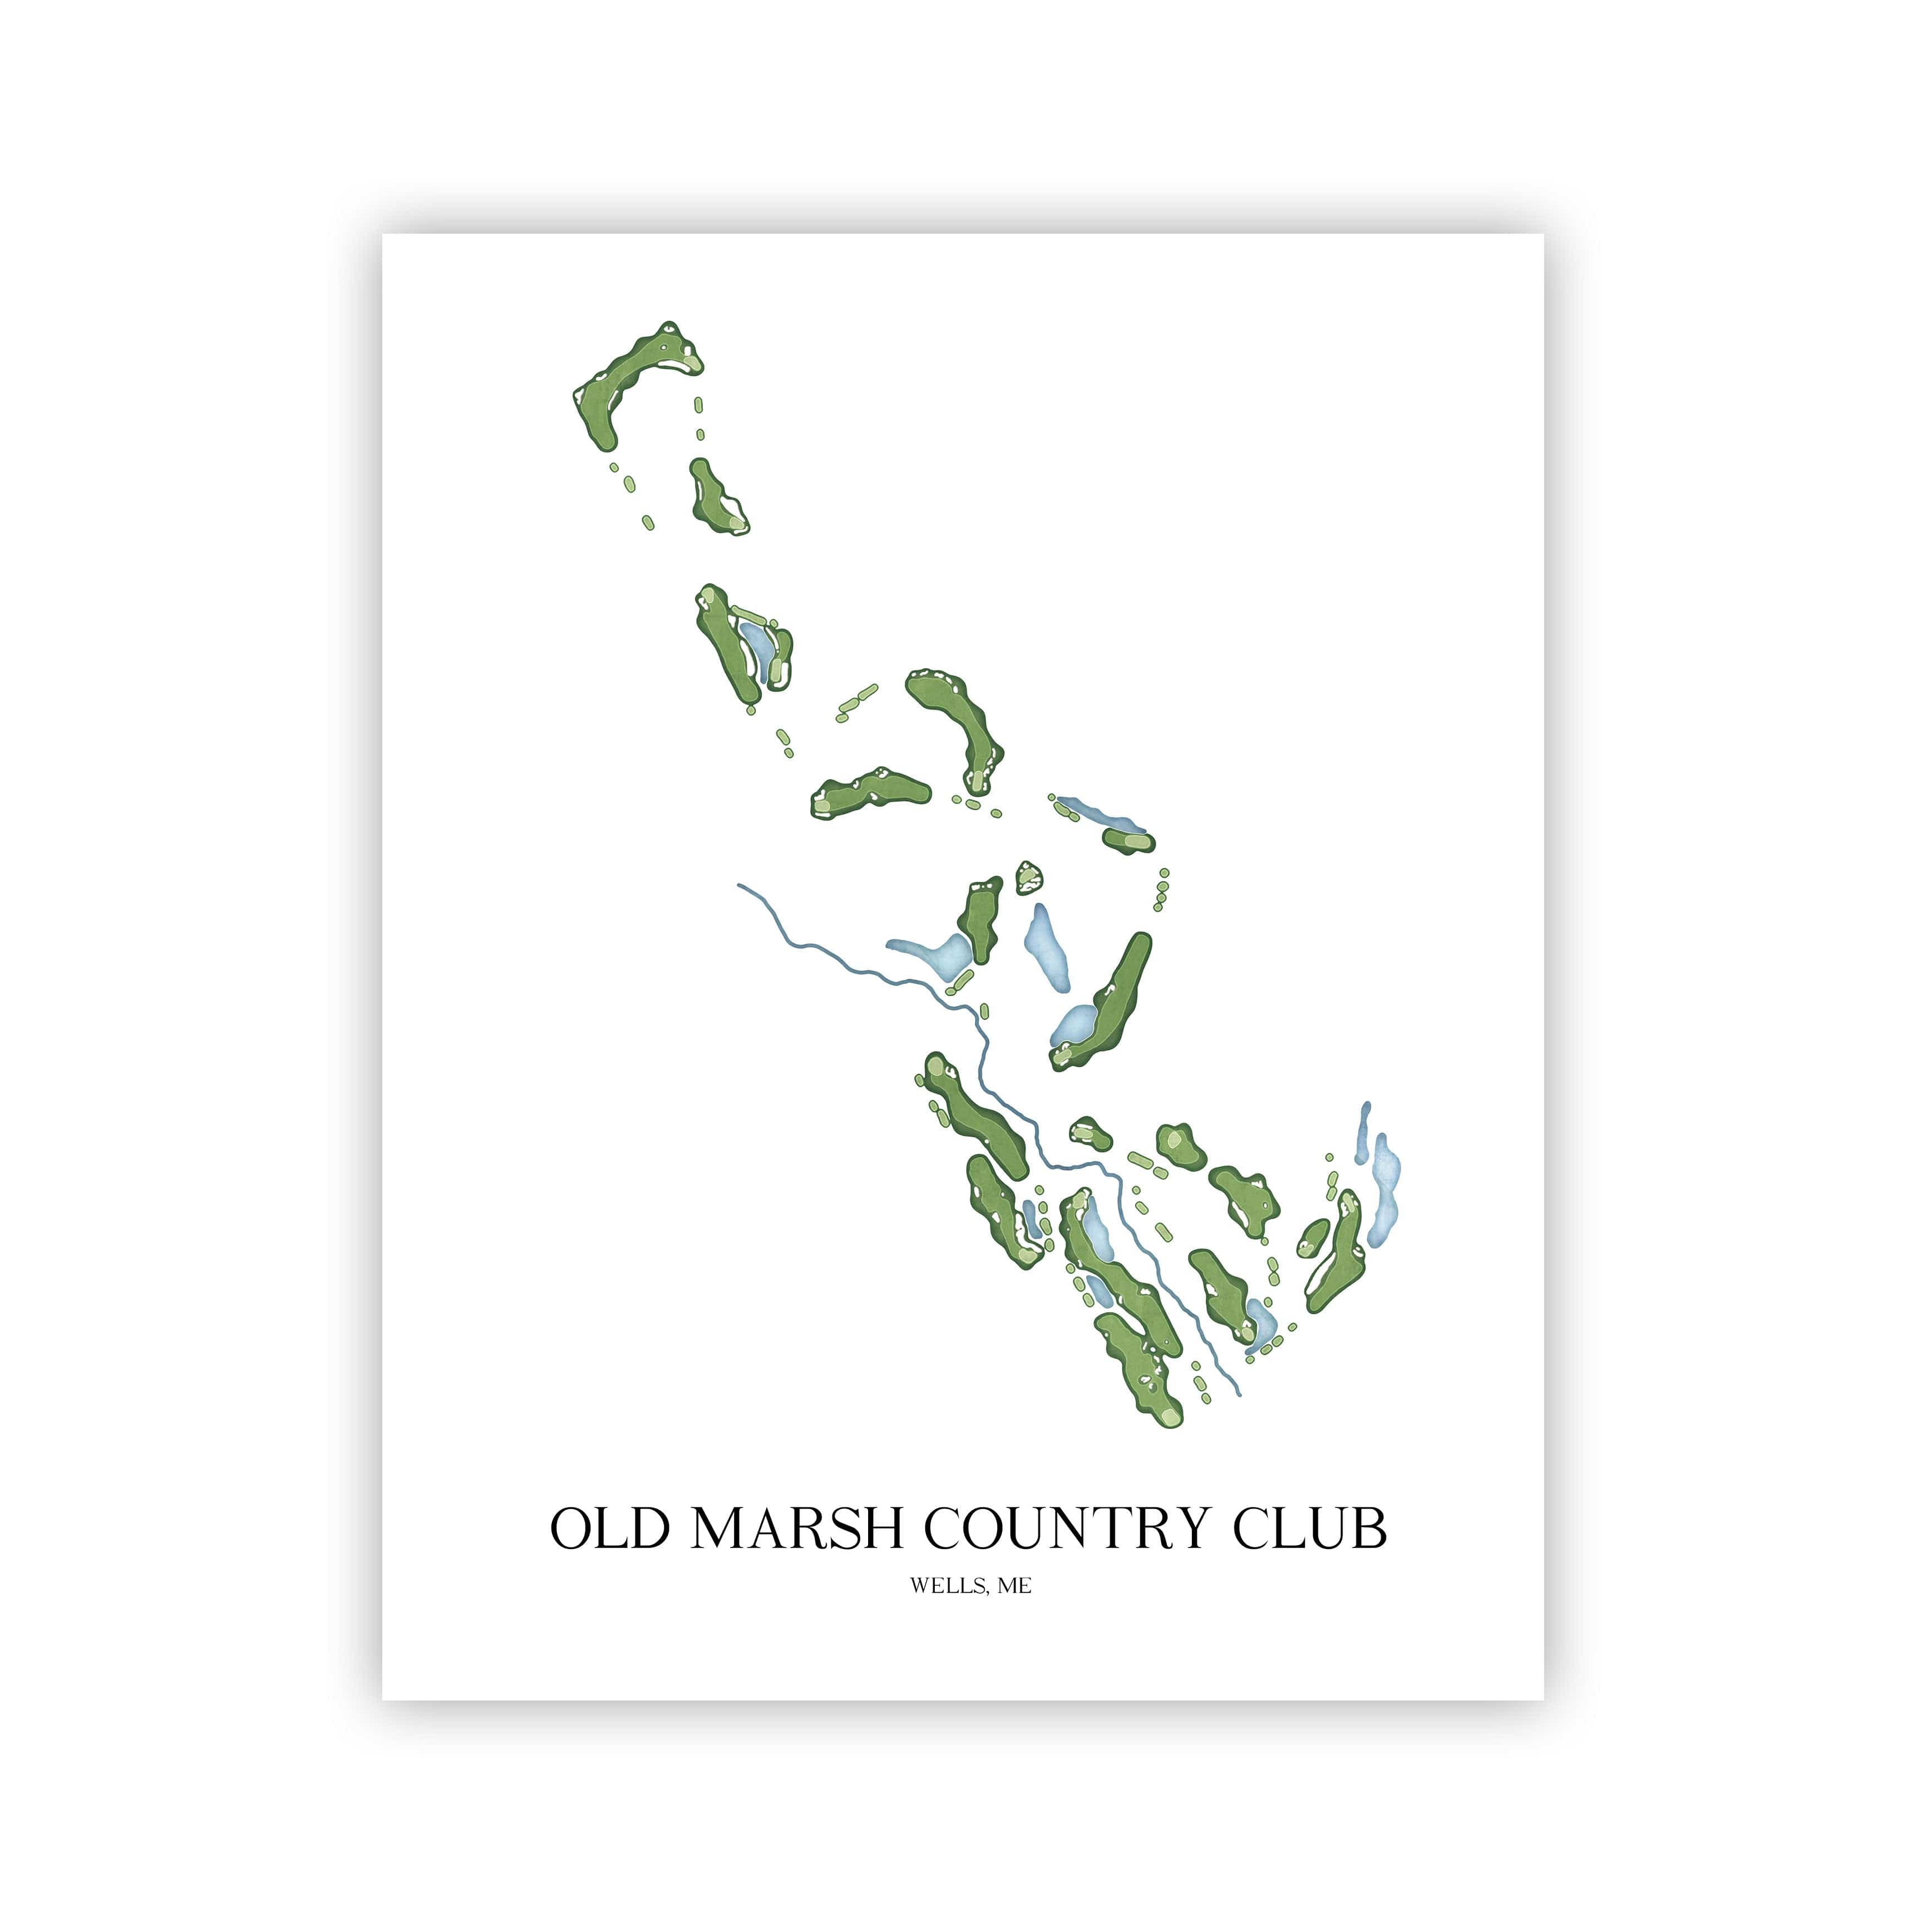 The 19th Hole Golf Shop - Golf Course Prints -  Old Marsh Country Club Golf Course Map